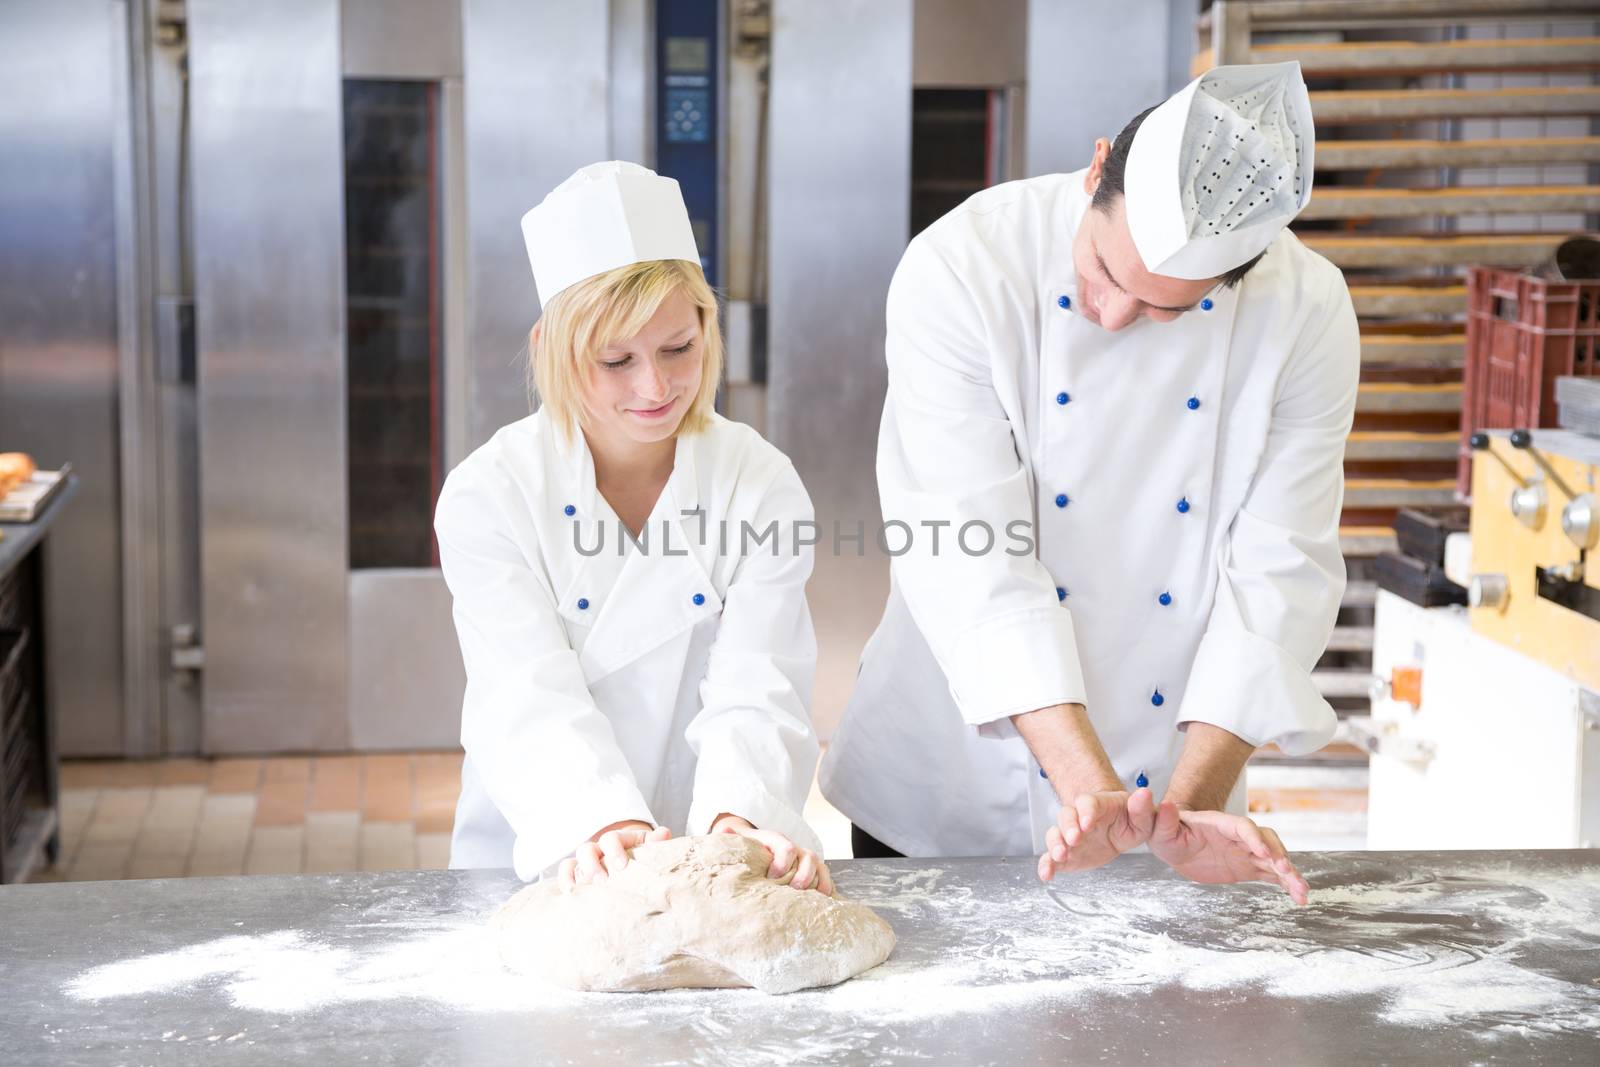 Baker instructing apprentice how to knead dough properly